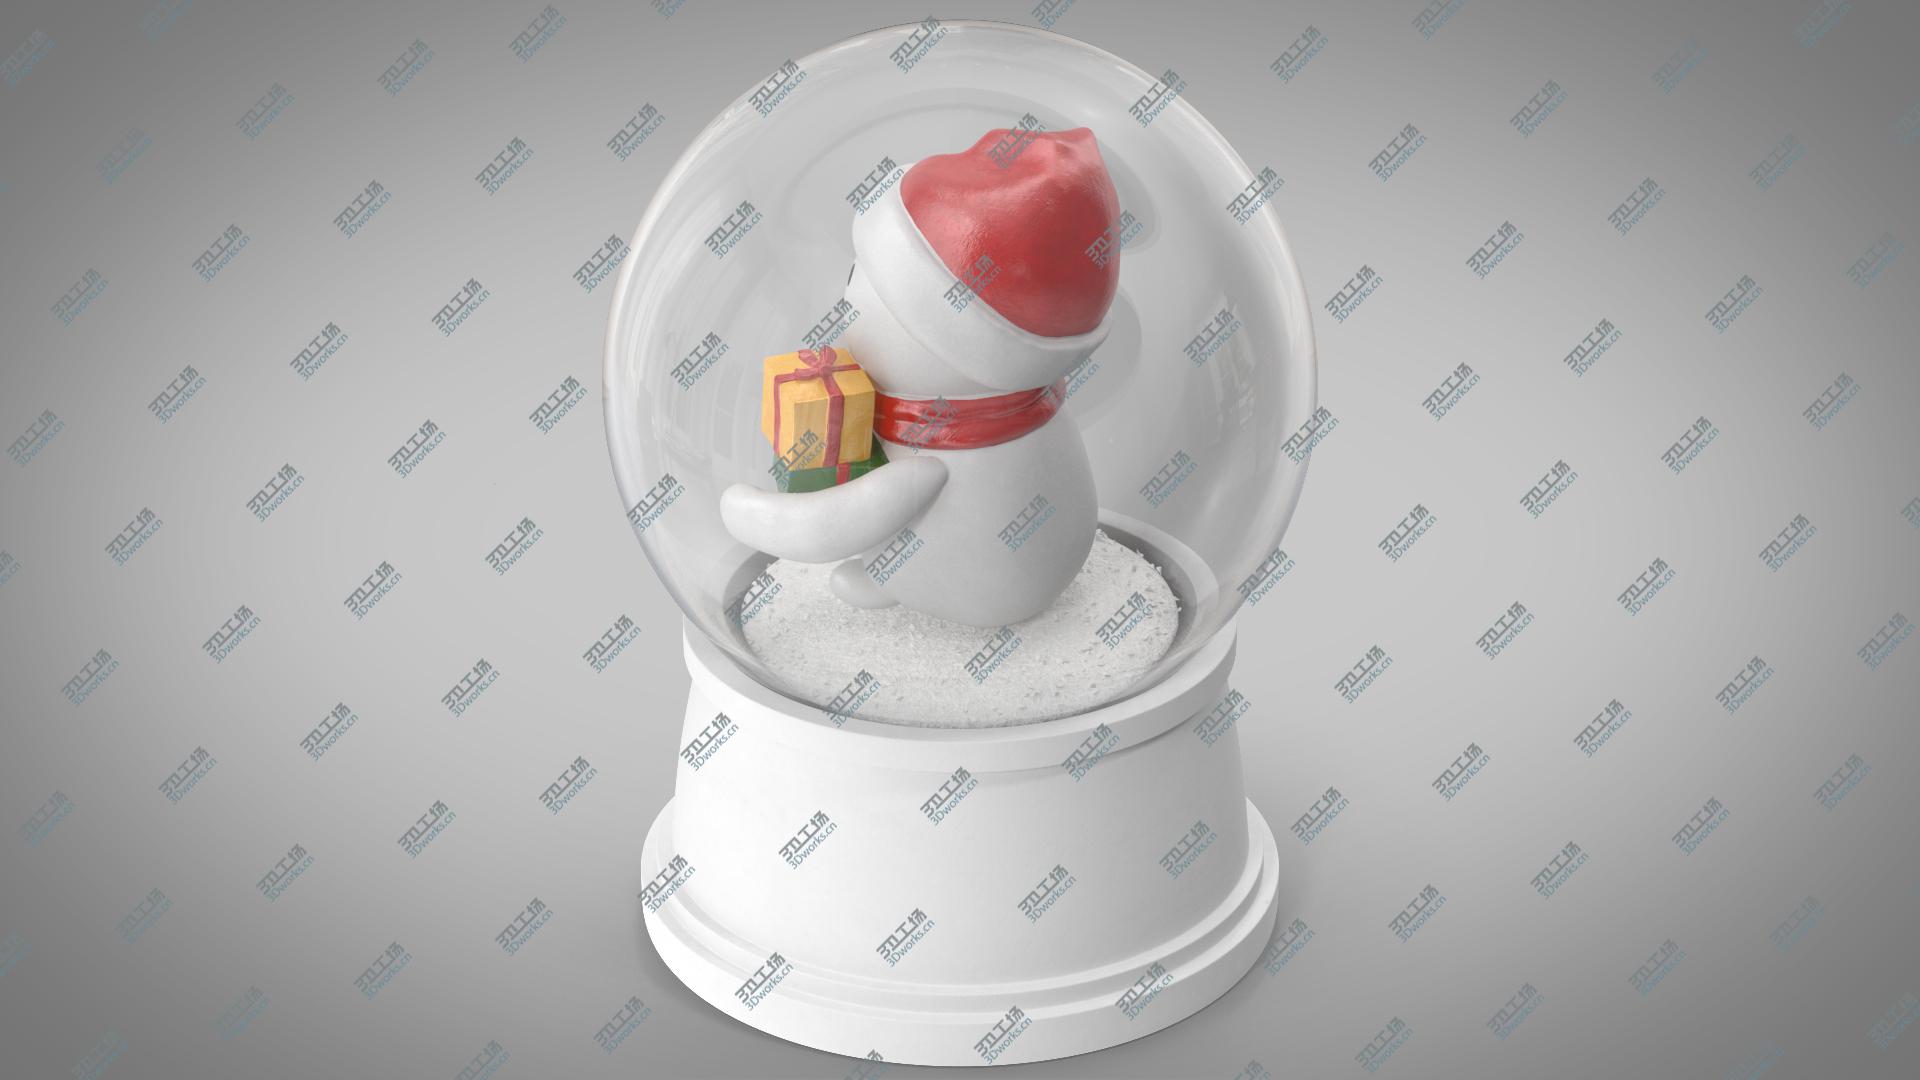 images/goods_img/2021040161/3D Snow Globe with a Snowman 5/5.jpg